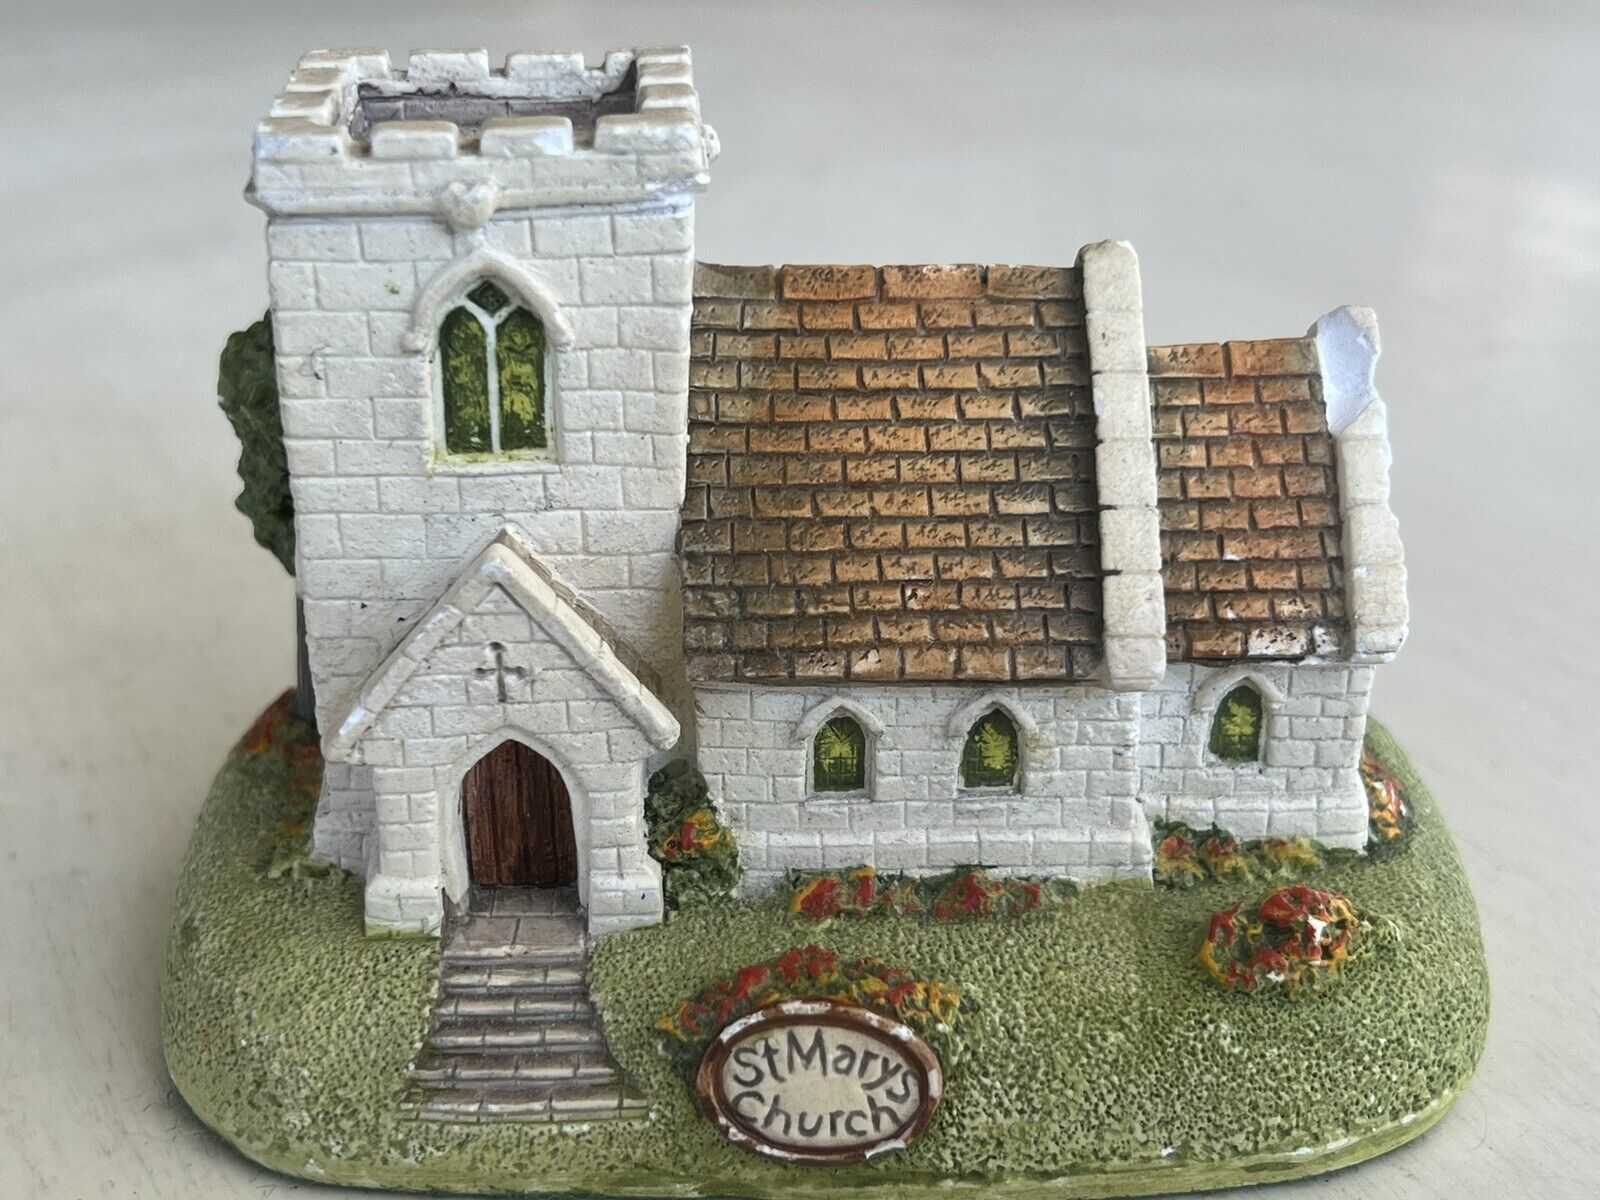 Memory Lane Miniature Cottage St. Mary’s Church By Peter Tomlins